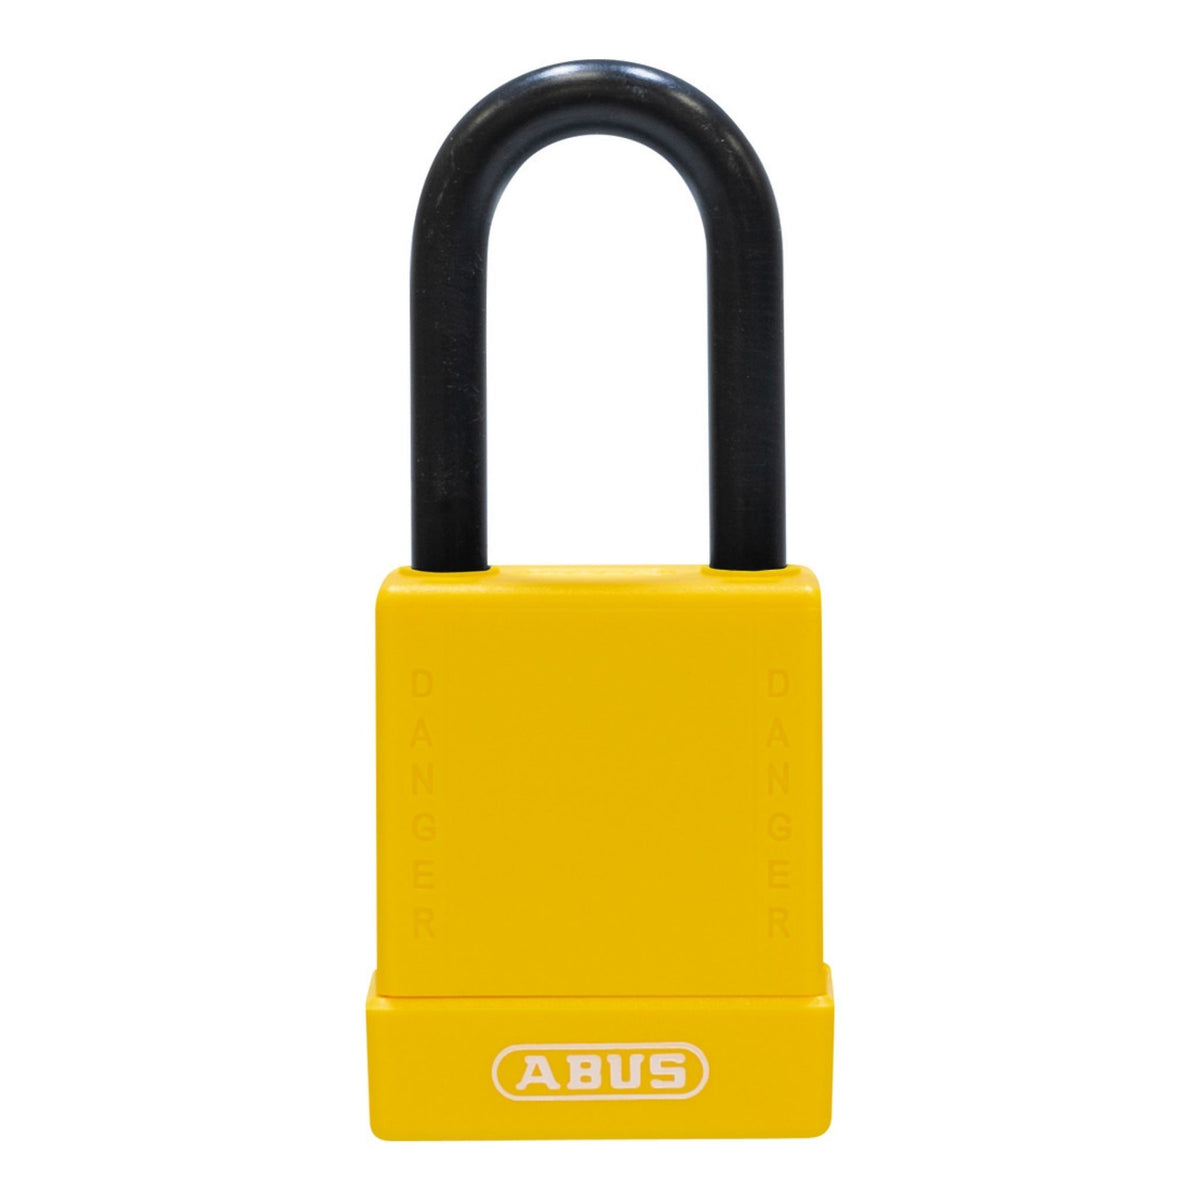 Abus 76PS/40 Yellow Safety Lock with Steel Shackle Covered by Plastic Sleeve - The Lock Source